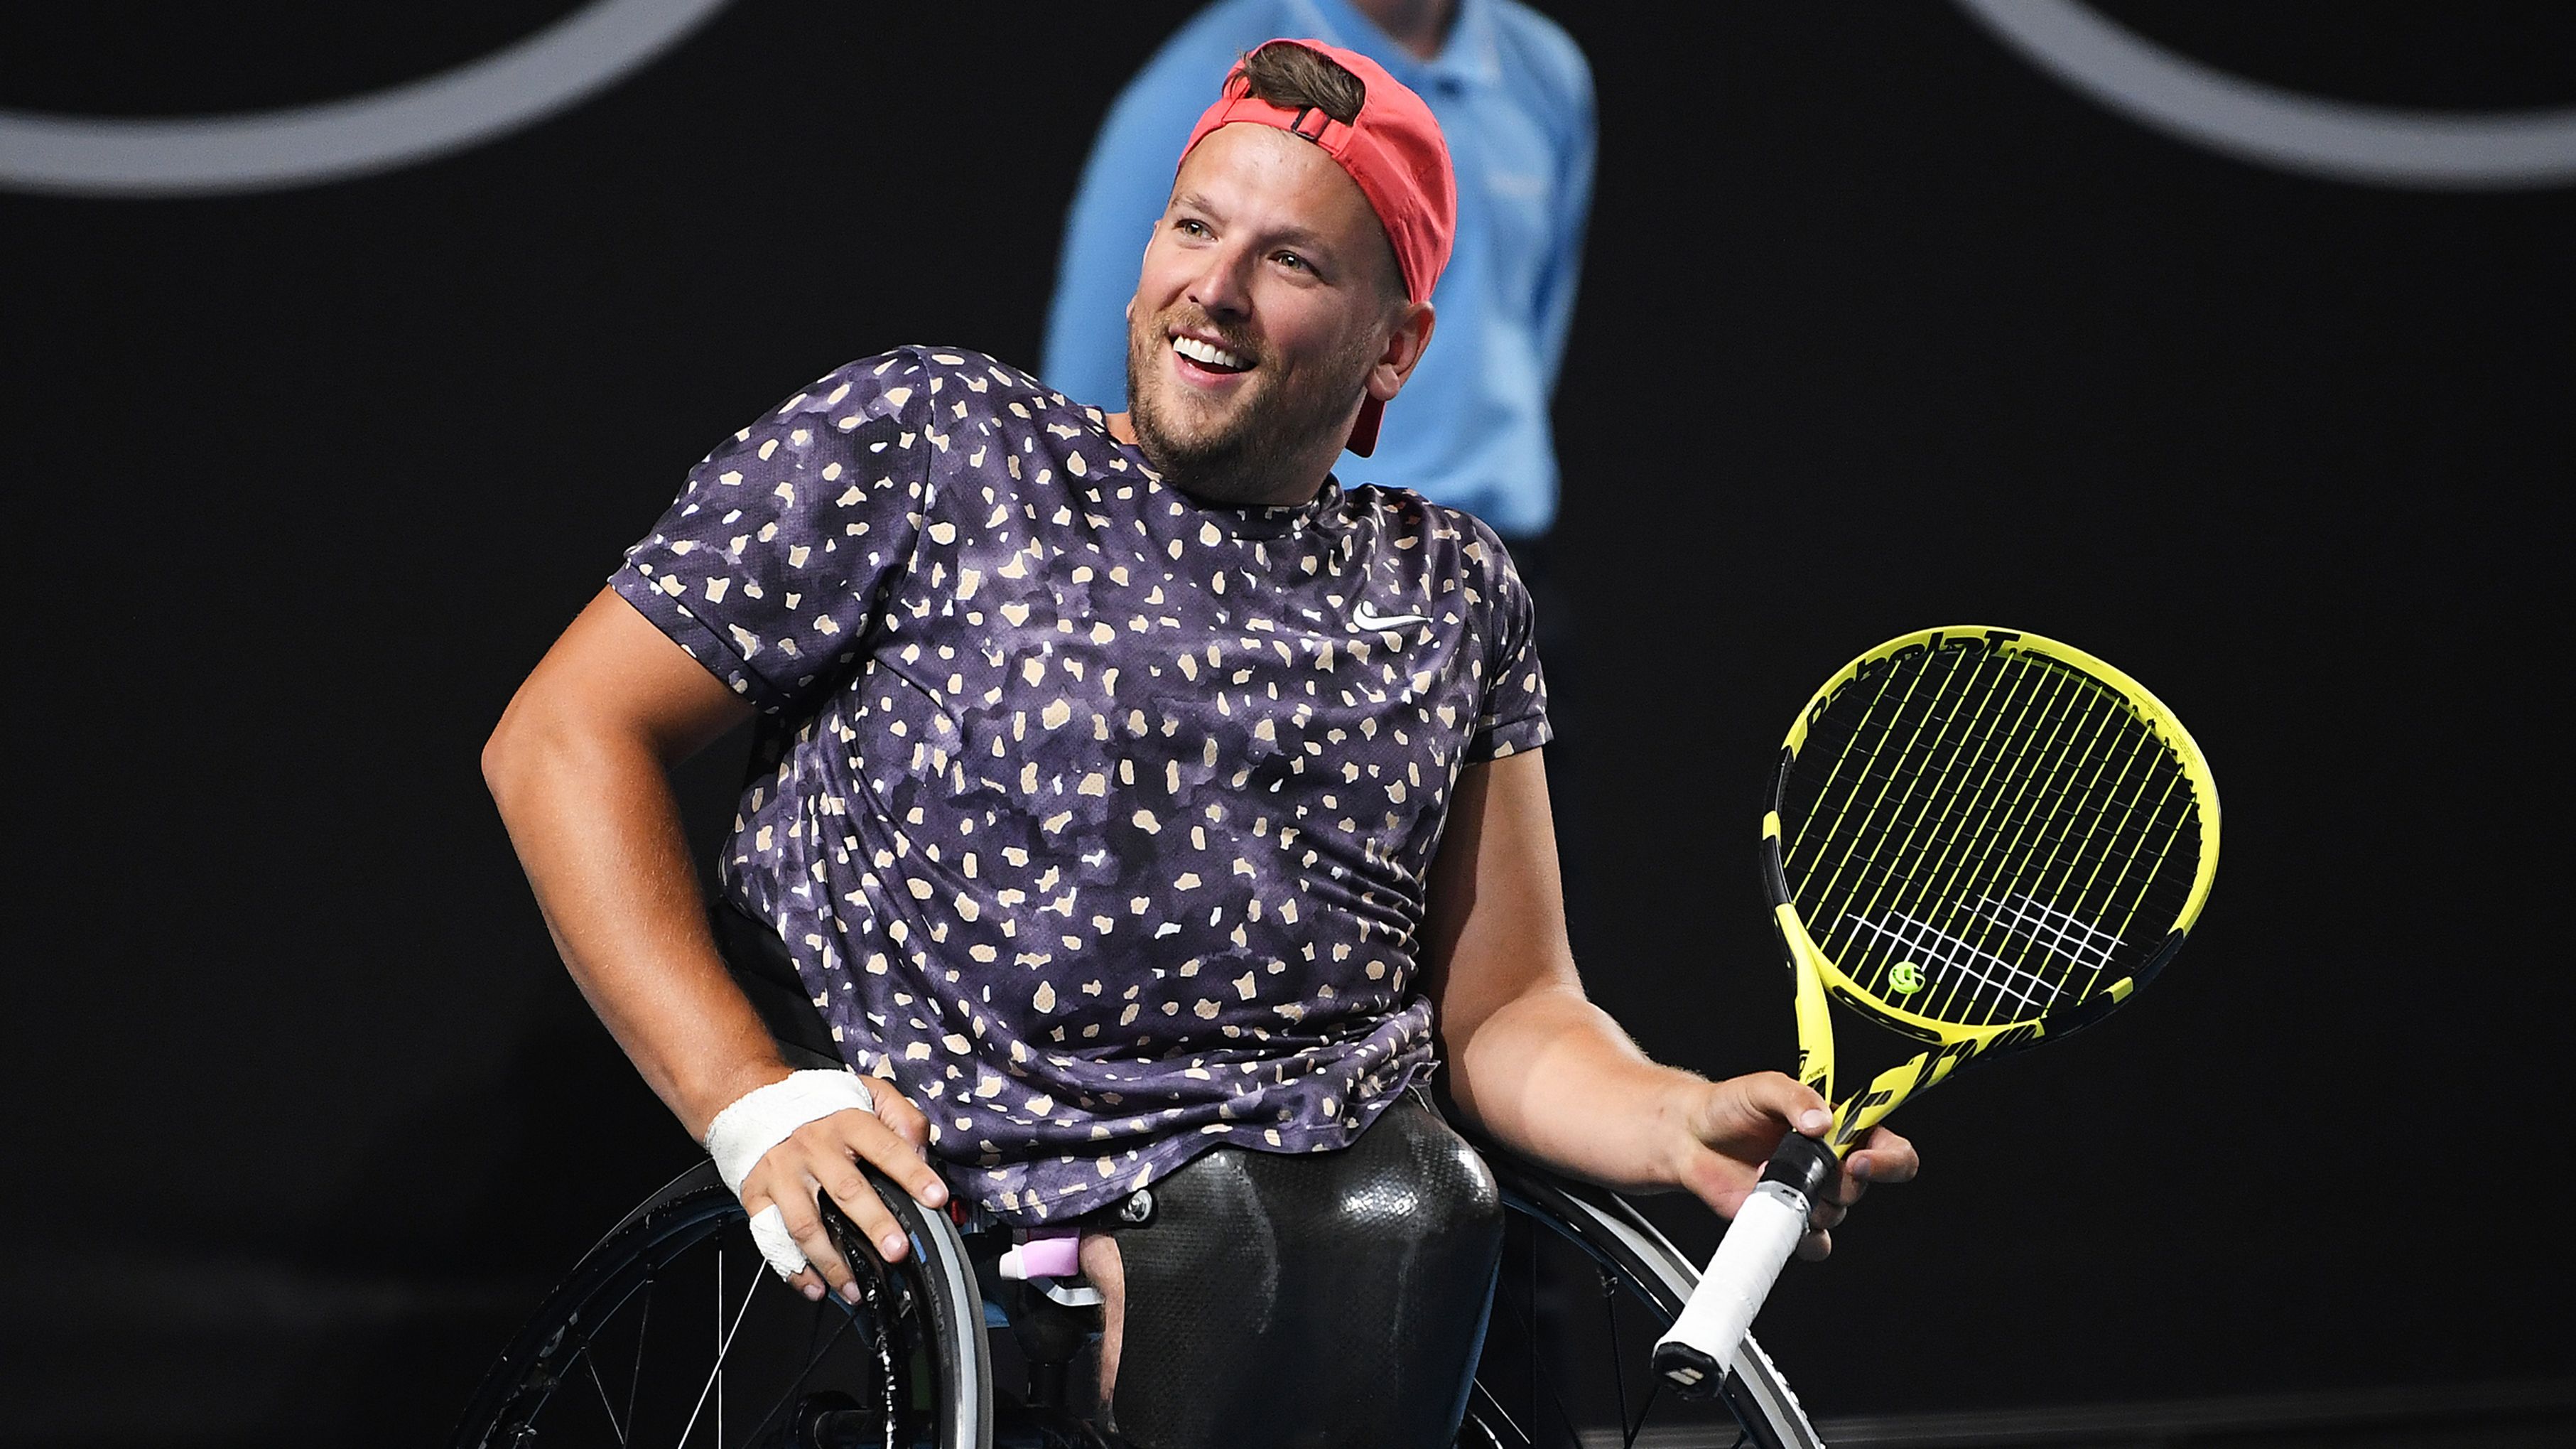 EXCLUSIVE: Dylan Alcott recalls hilarious first meeting with Roger Federer